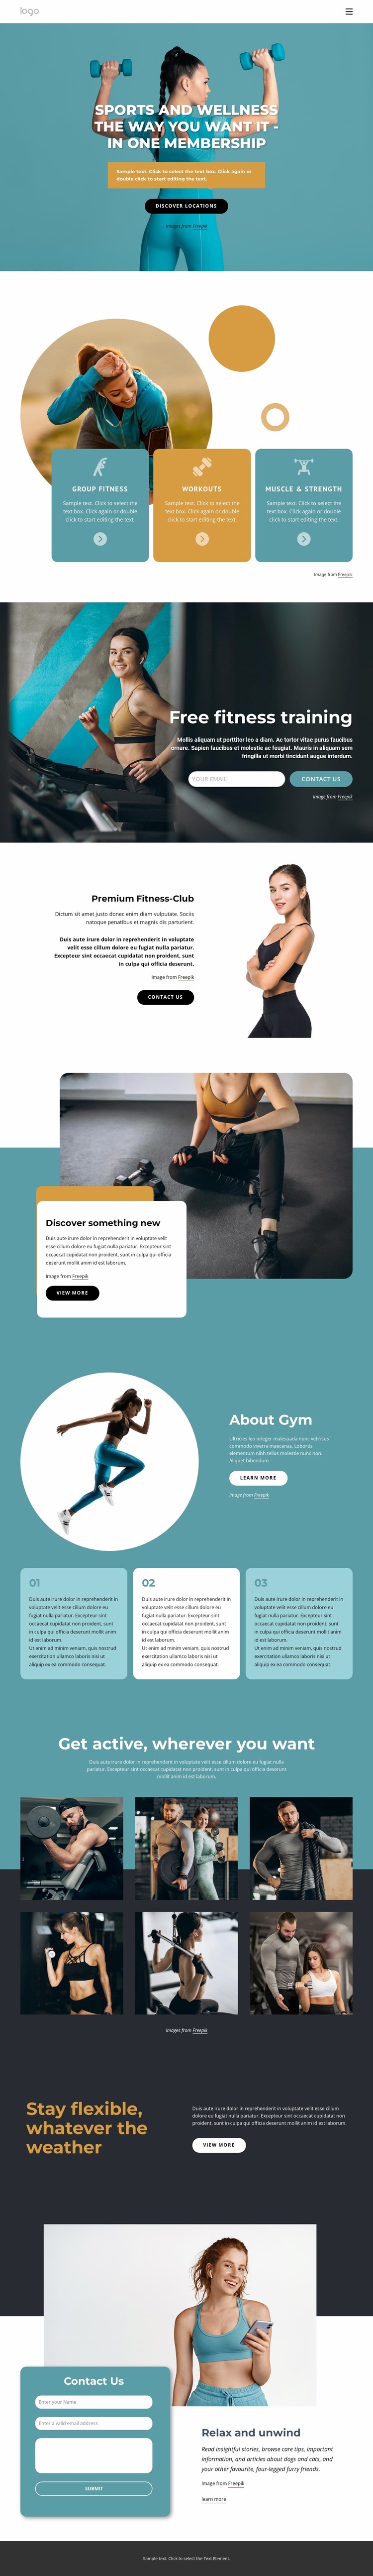 Workout anywhere with one membership WordPress Website Builder